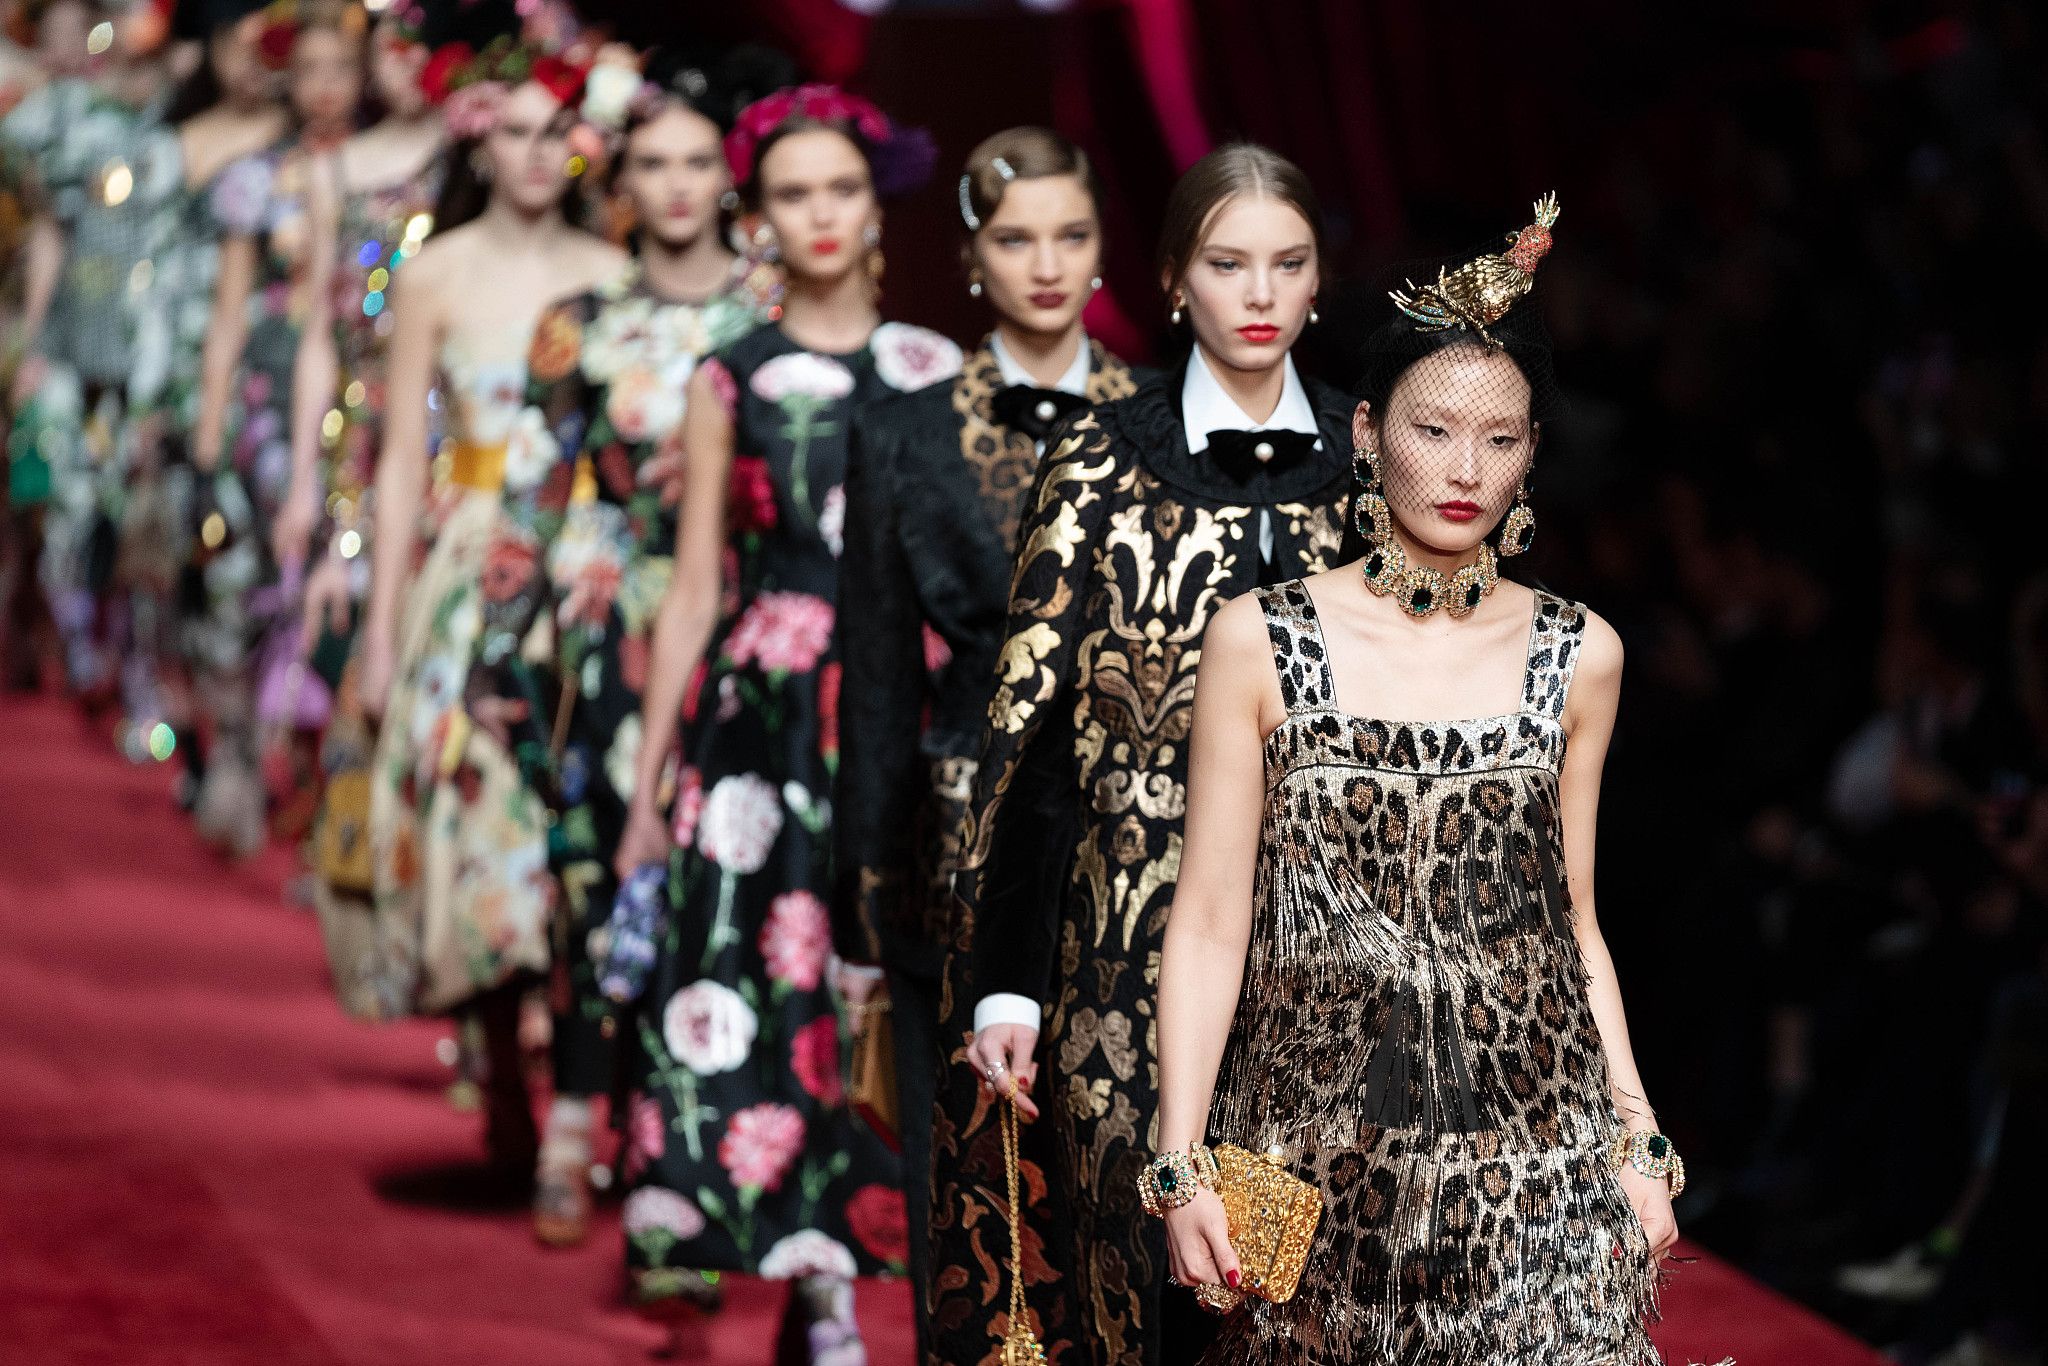 Milan Fashion Week: Why D&G Needs to Act Now to Restore Trust with